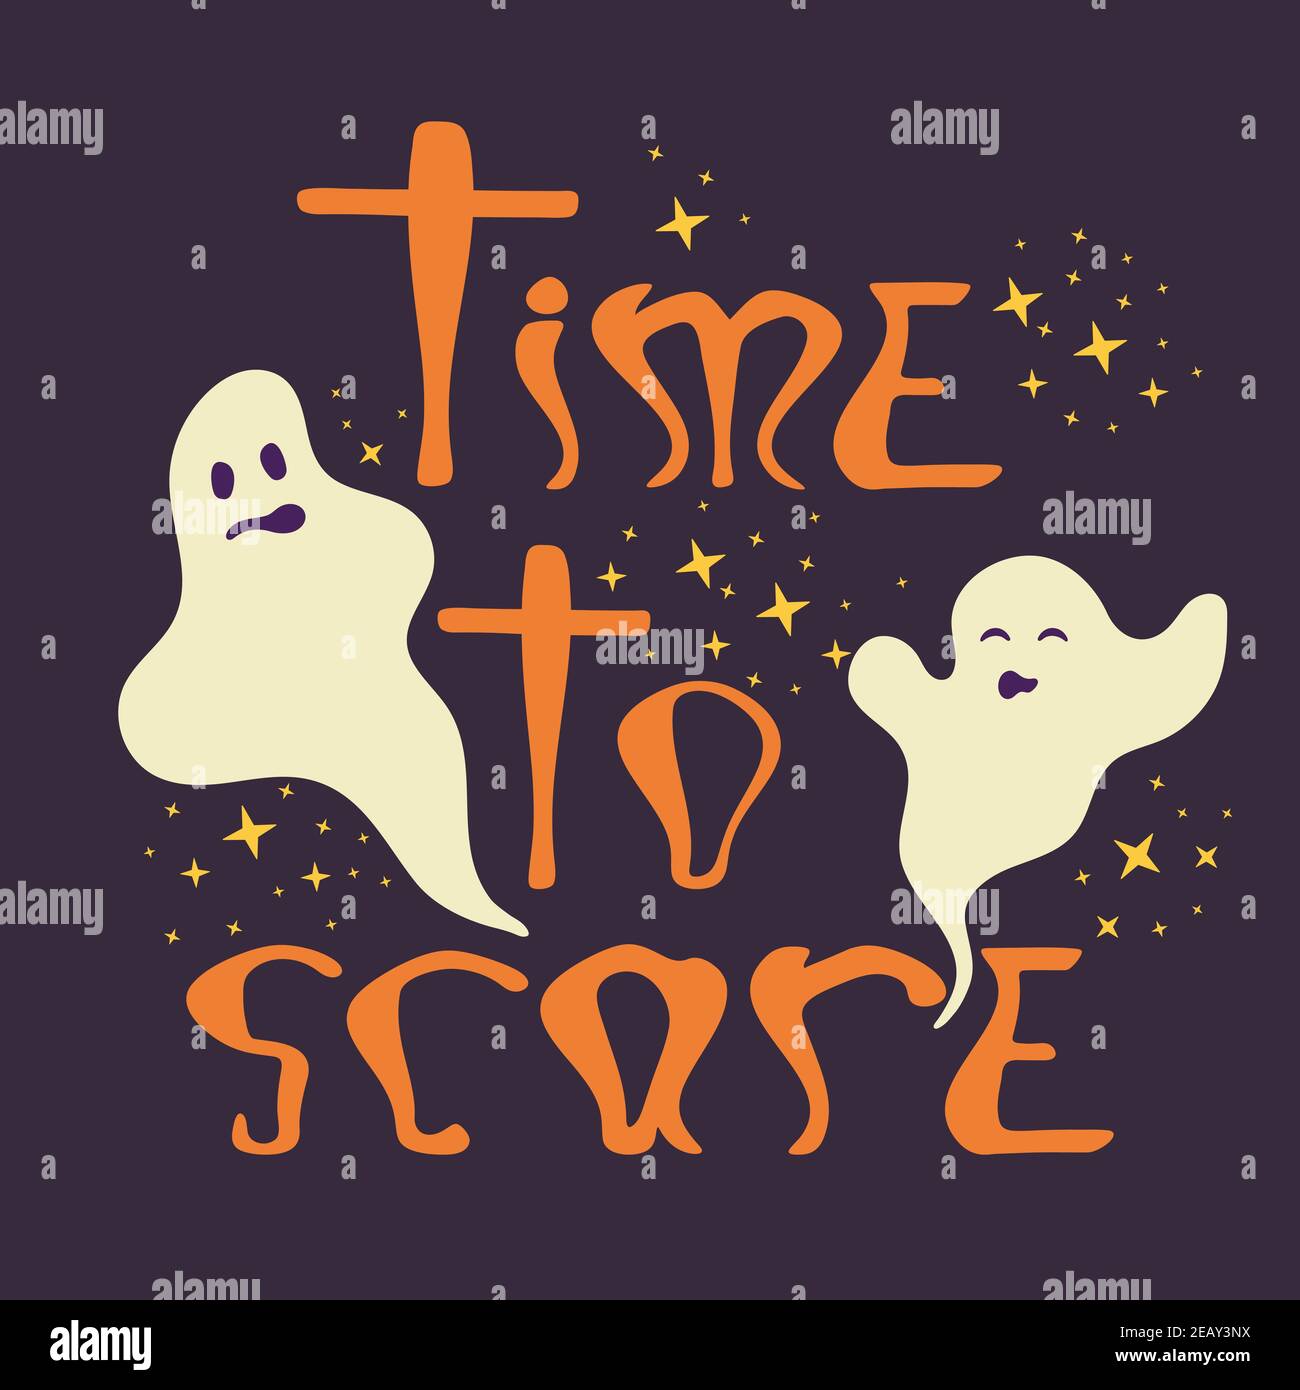 Time to scare halloween poster with ghosts Stock Vector